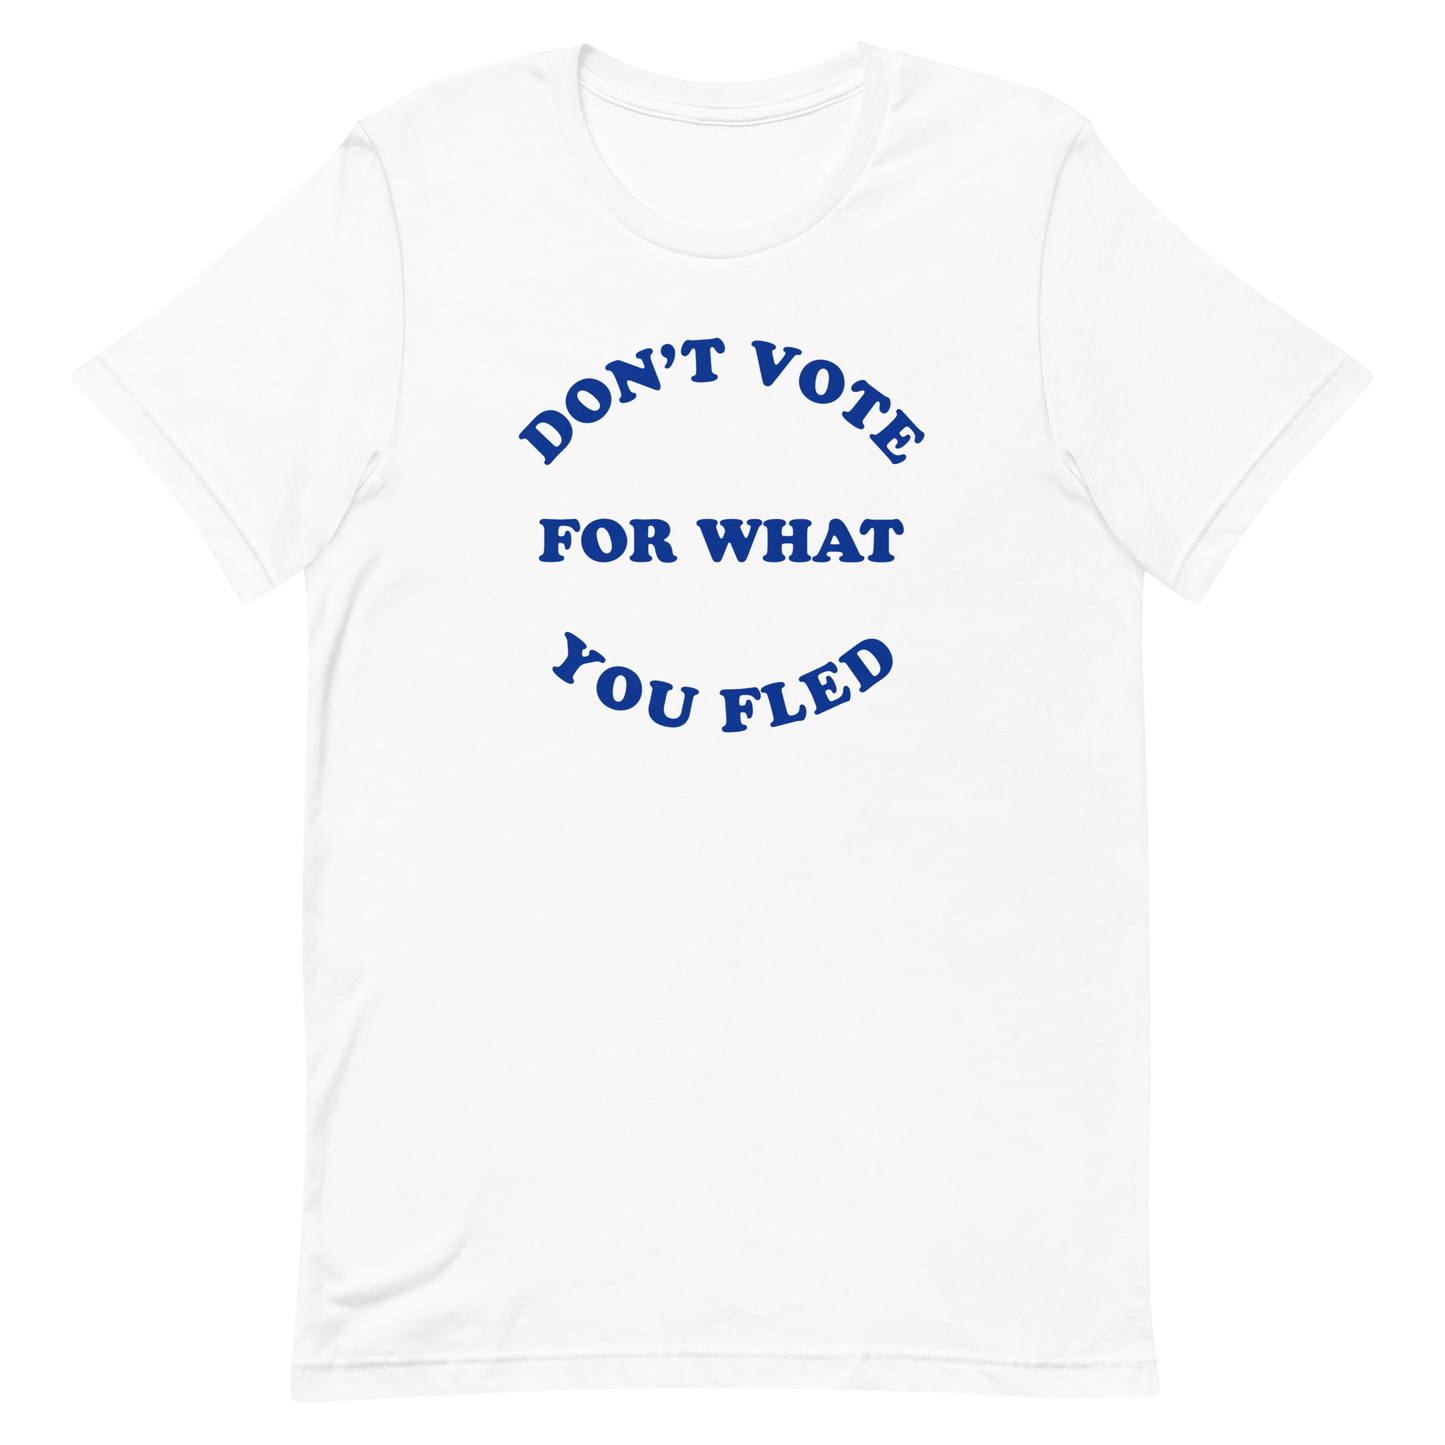 Don't Vote For What You Fled T-shirt